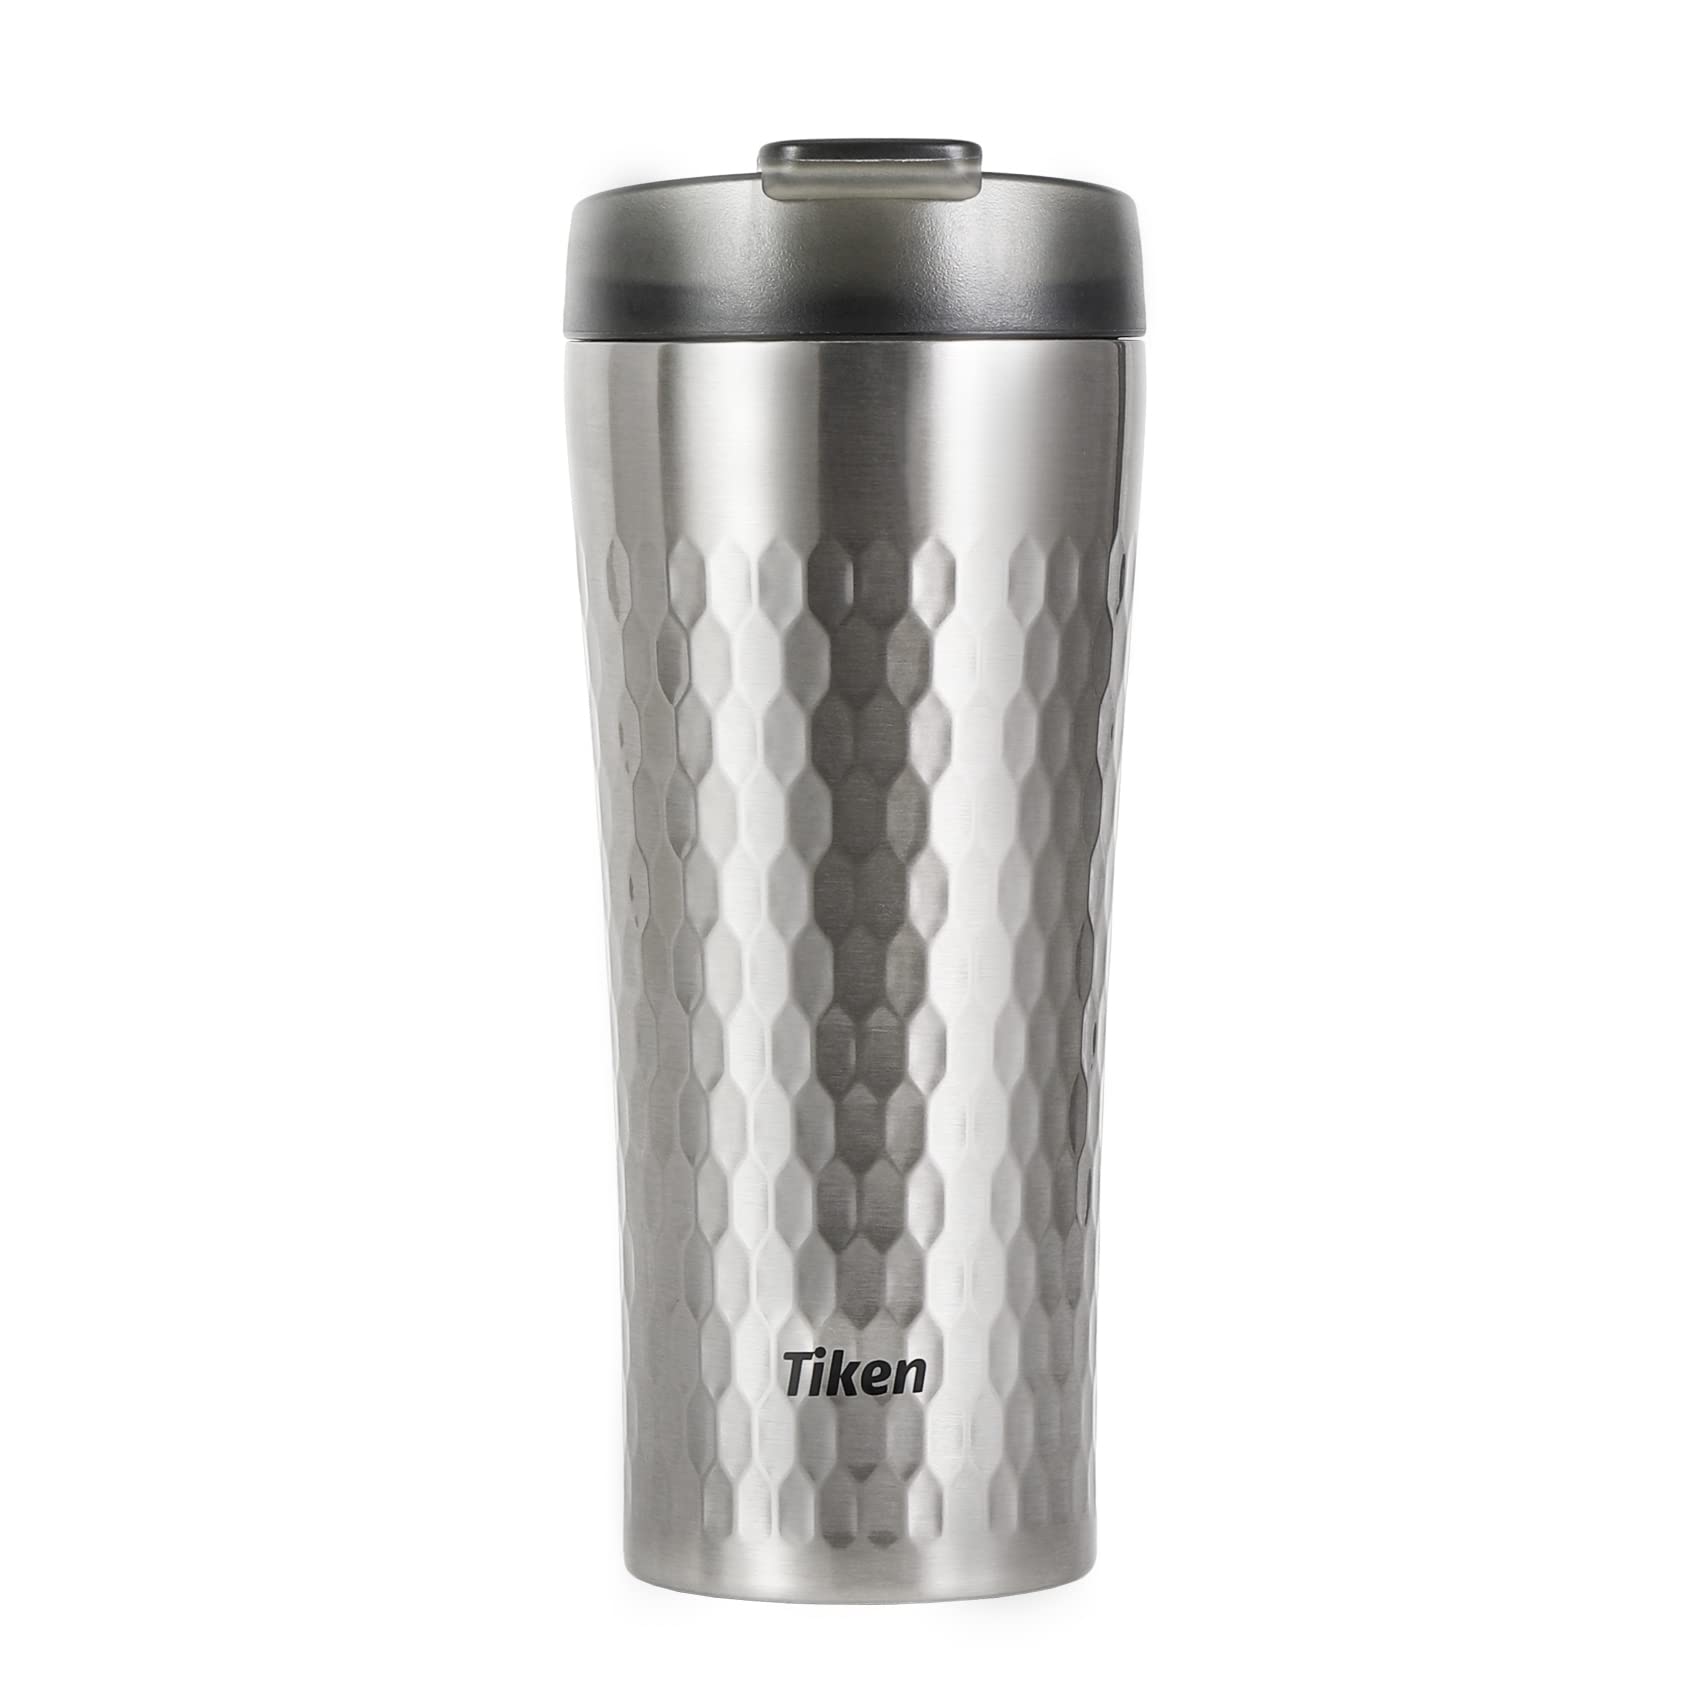 Tiken 16 Oz Insulated Tumbler, Stainless Steel Coffee Tumblers with Stronghold Lid, Travel Coffee Mug 470ML – Silver $9.49